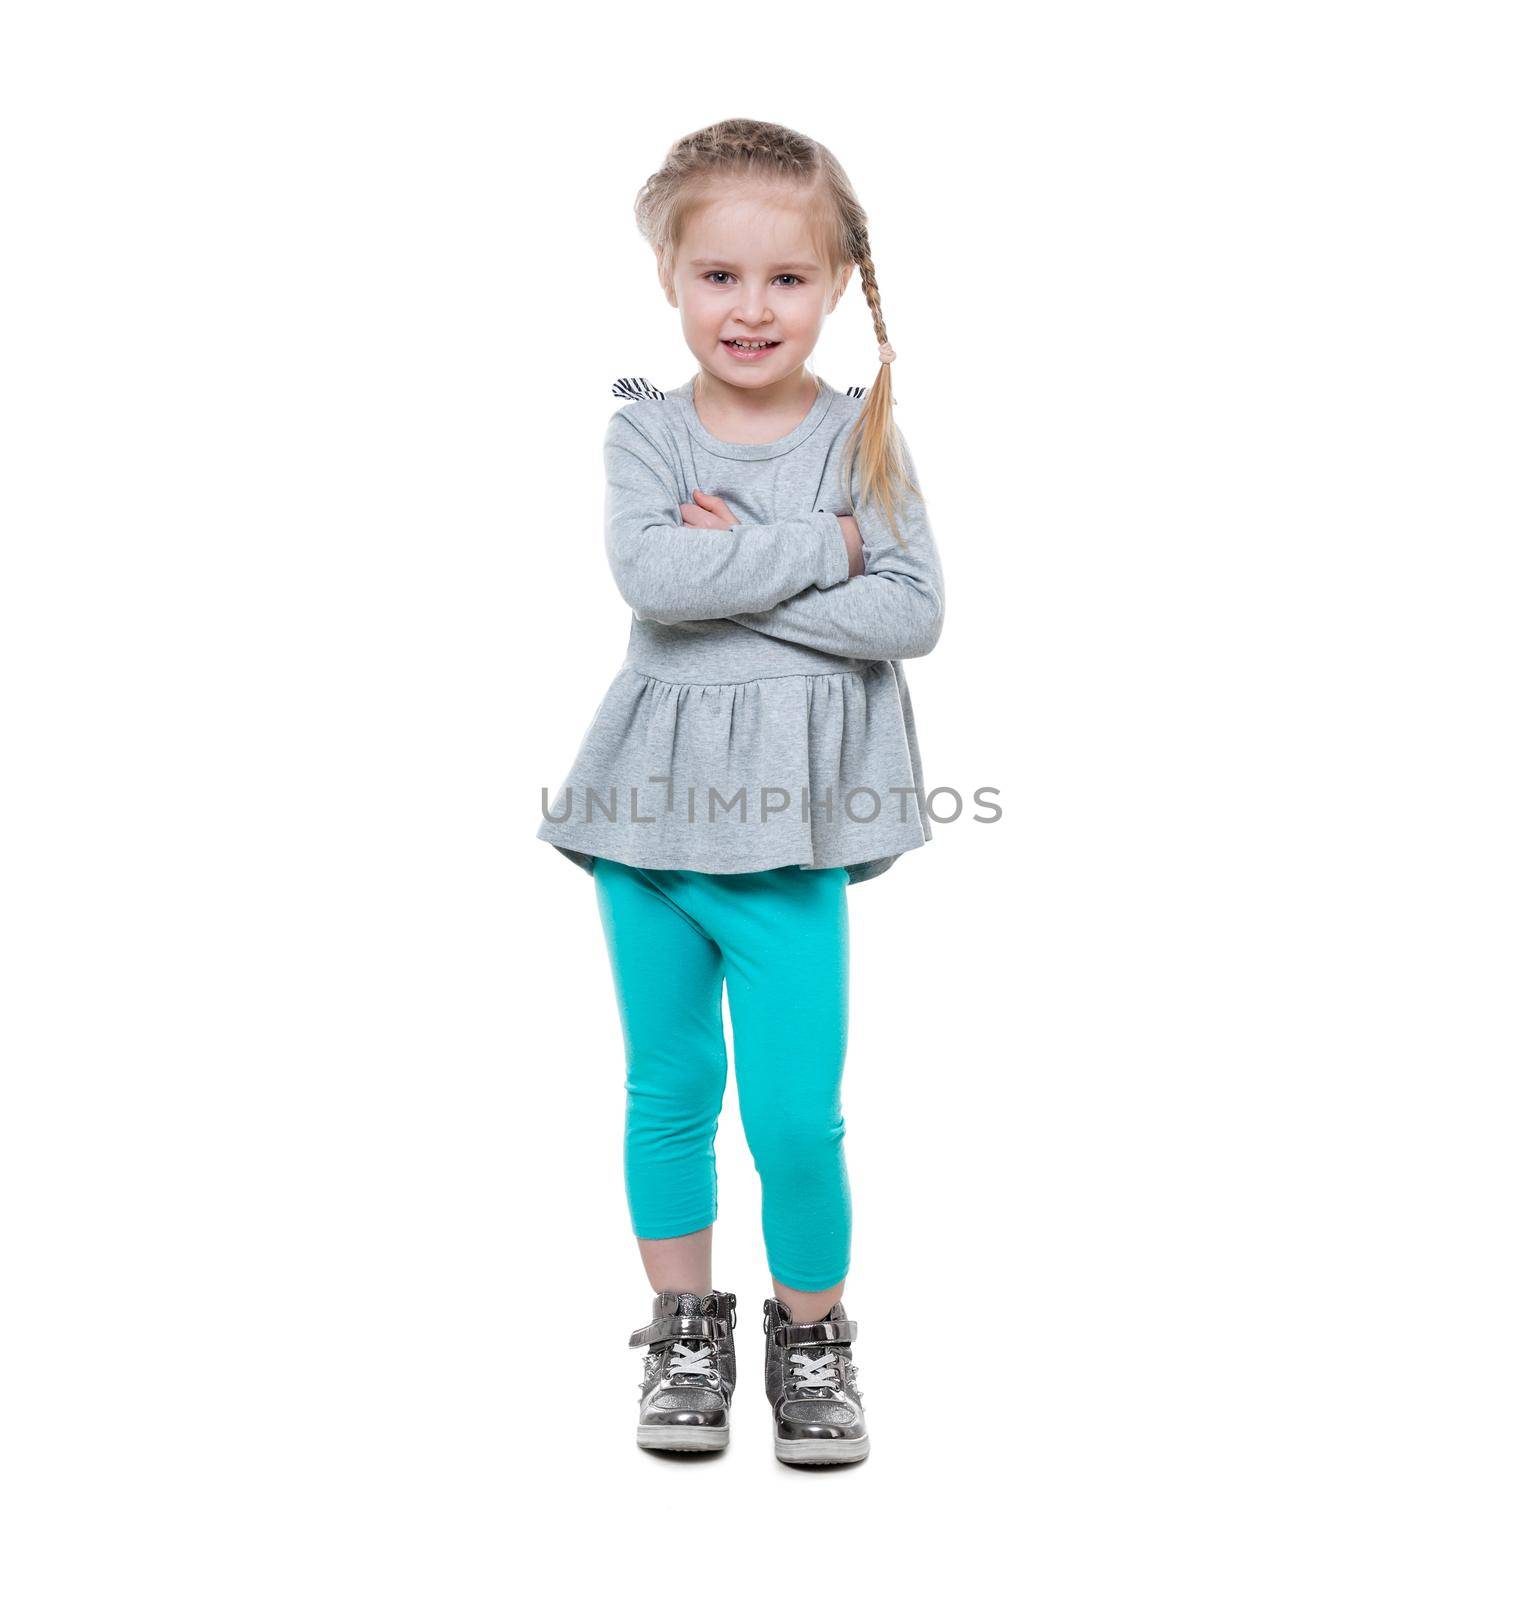 Sweet little girl with nice hairstyle standing with her arms crossed, smiling widely, isolated